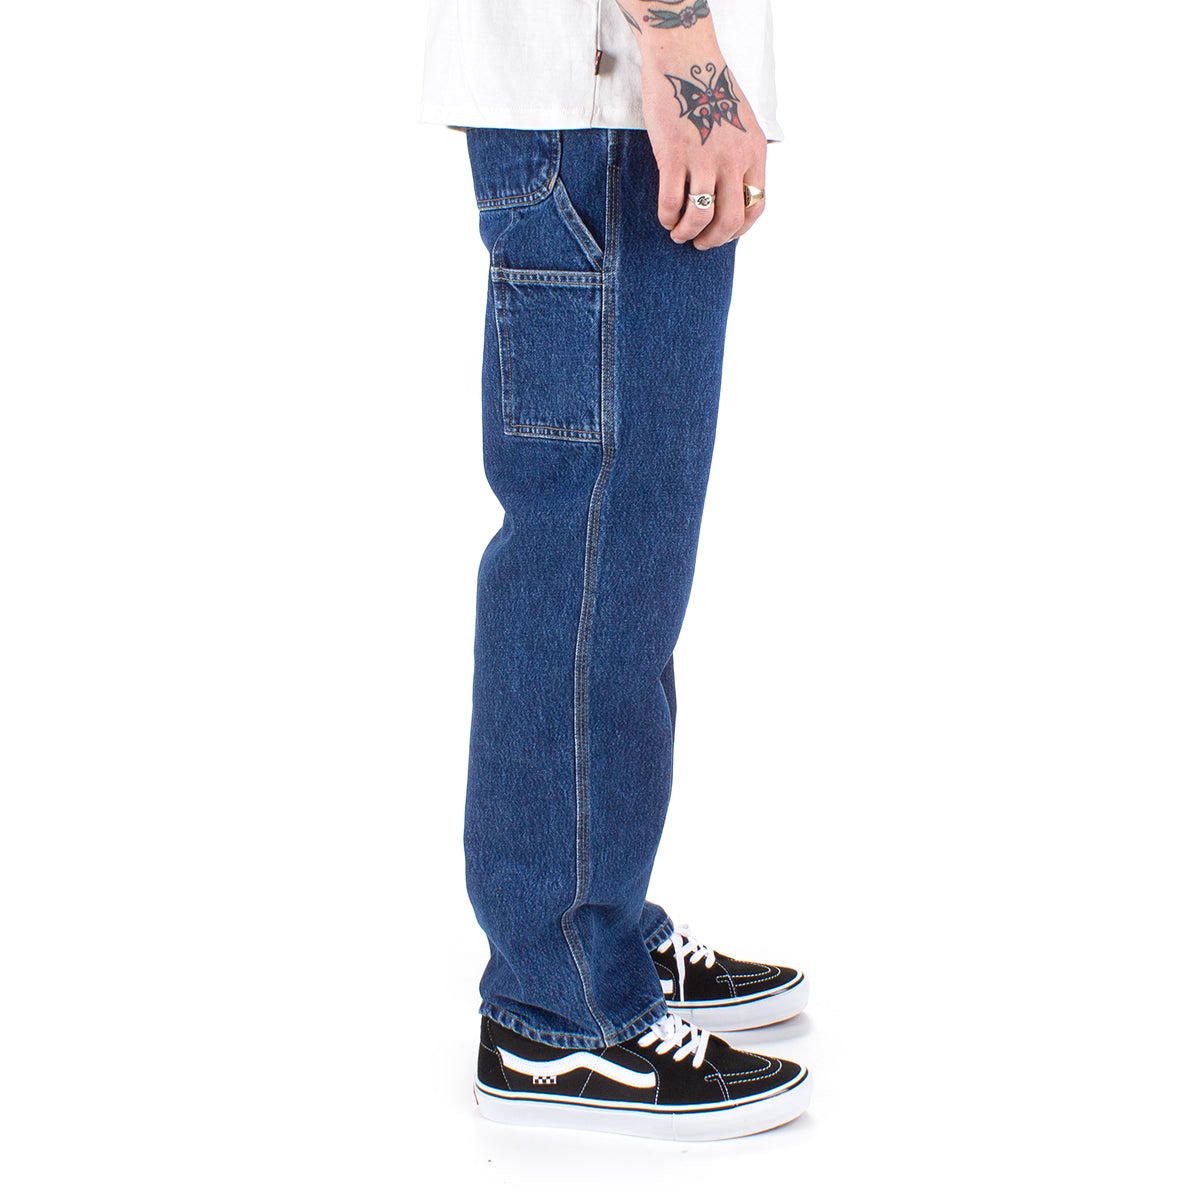 Carhartt WIP | Single Knee Pant Style # I032024-0106 Color : Blue (Stone Washed)